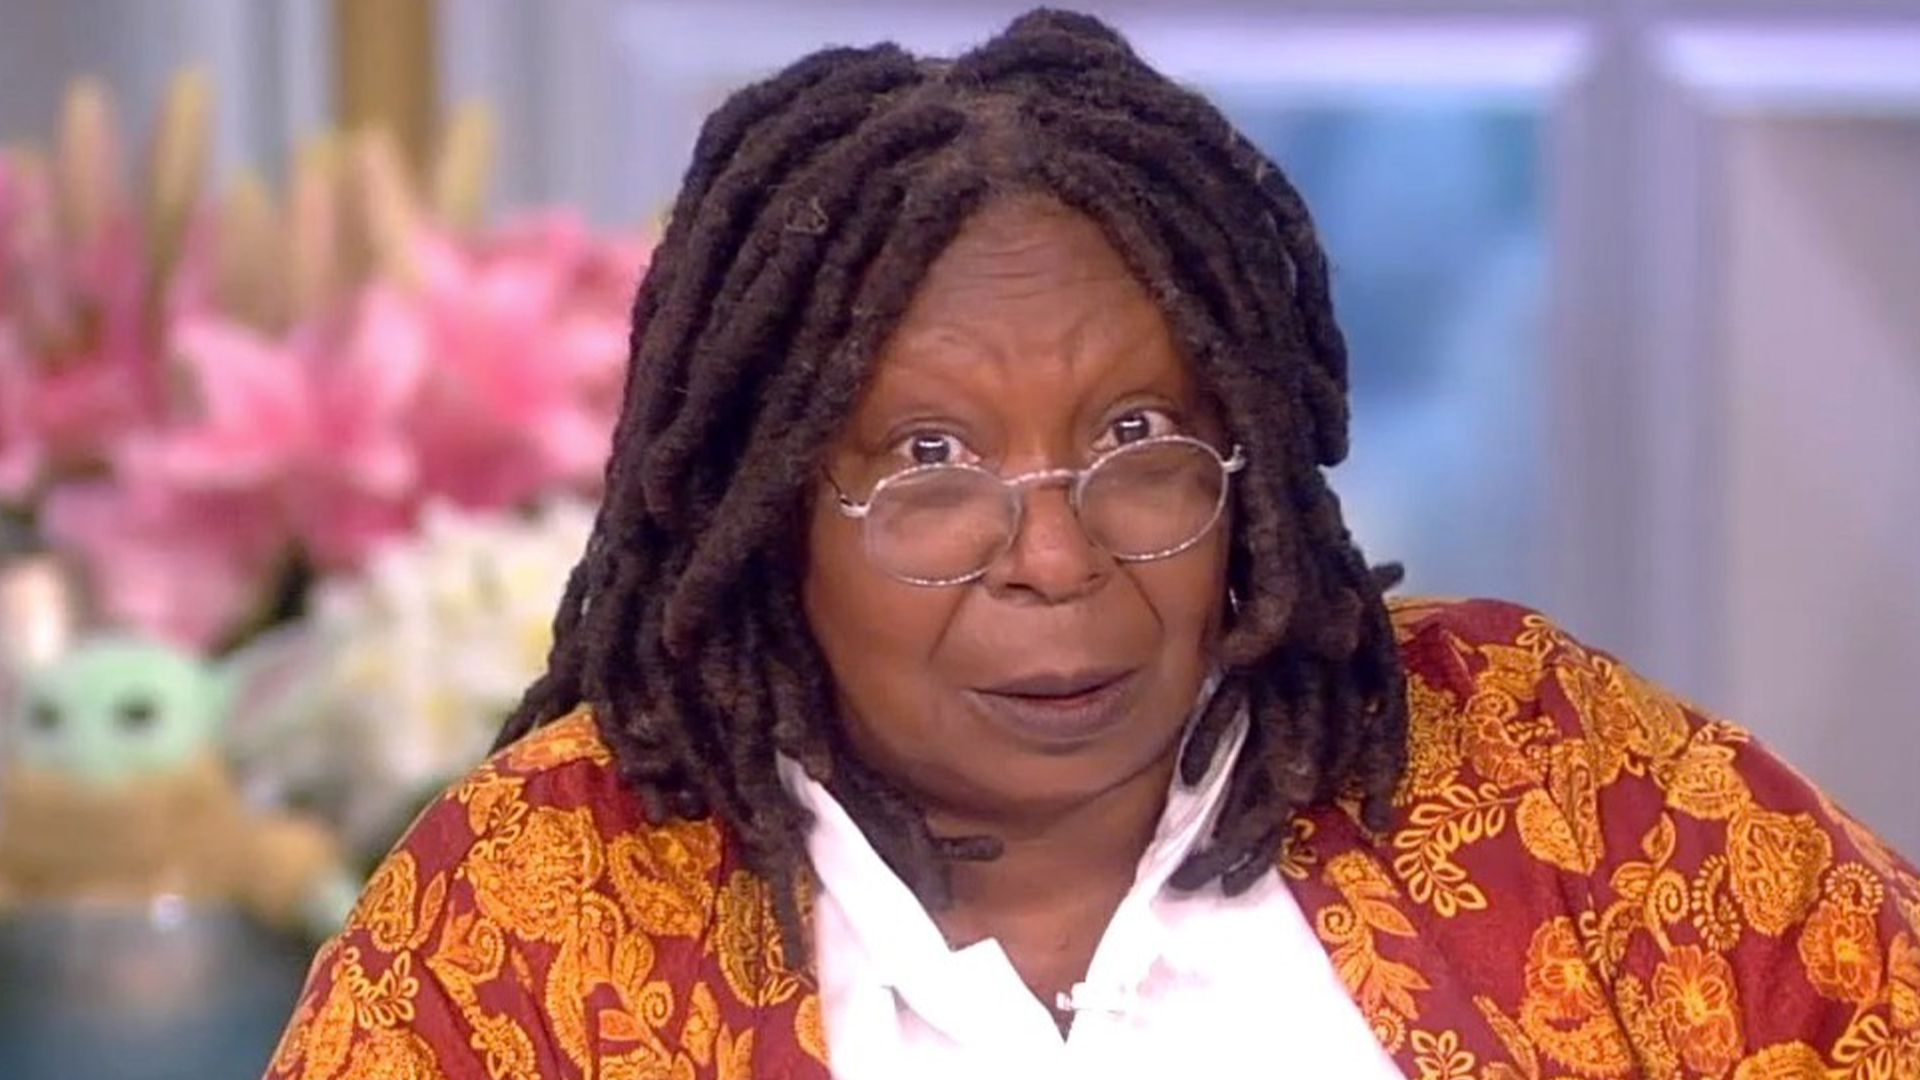 The View’s Whoopi Goldberg grimaces & shakes her head over Alicia Silverstone’s shocking confession that divided fans